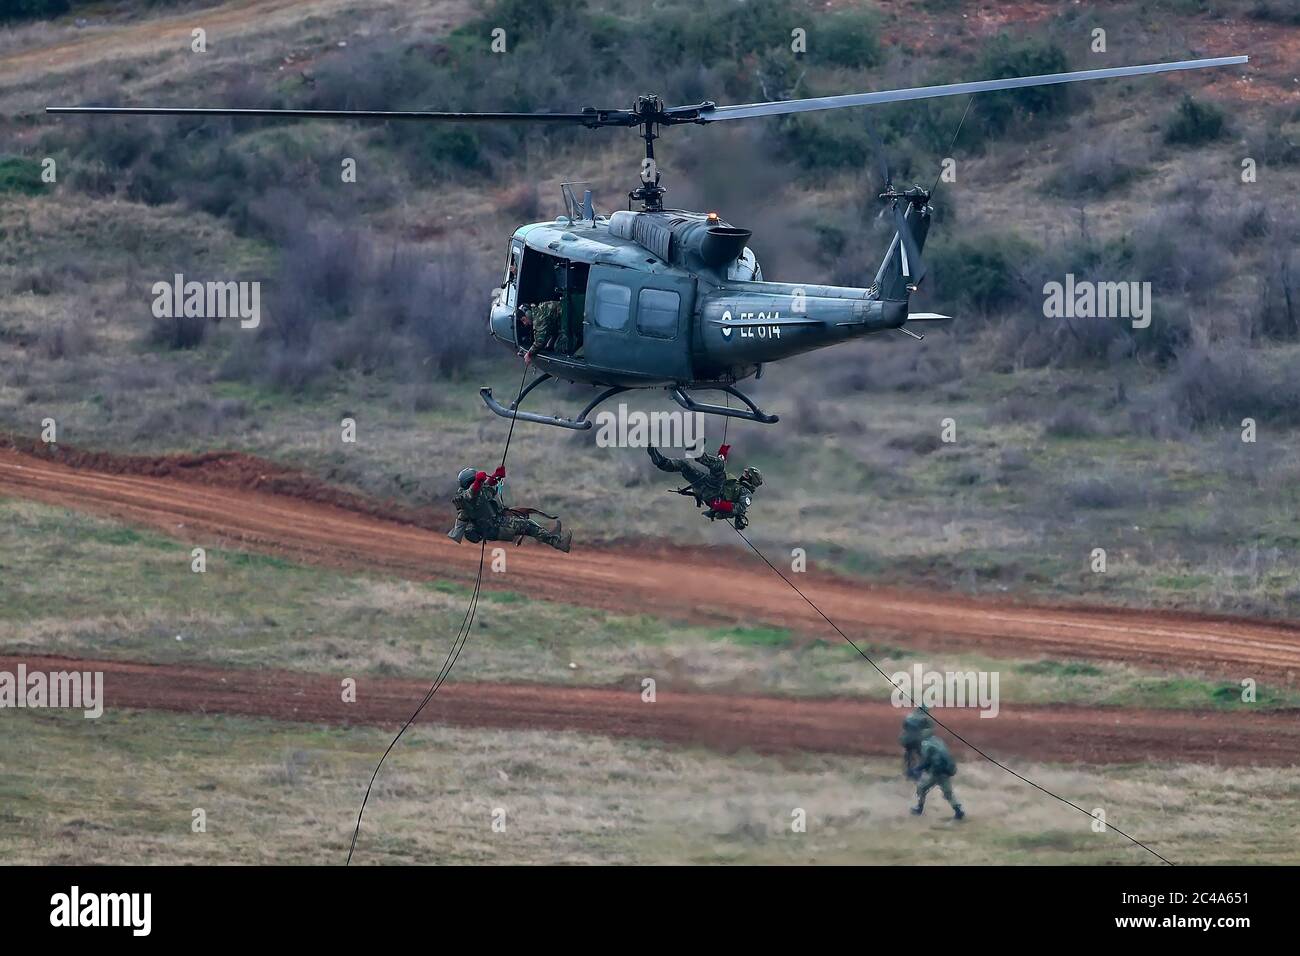 Askos, Greece - Feb 14, 2020: UH-1H Huey Helicopter takes part at a international military exercise with real fire (Golden Fleece -20) between Greek , Stock Photo